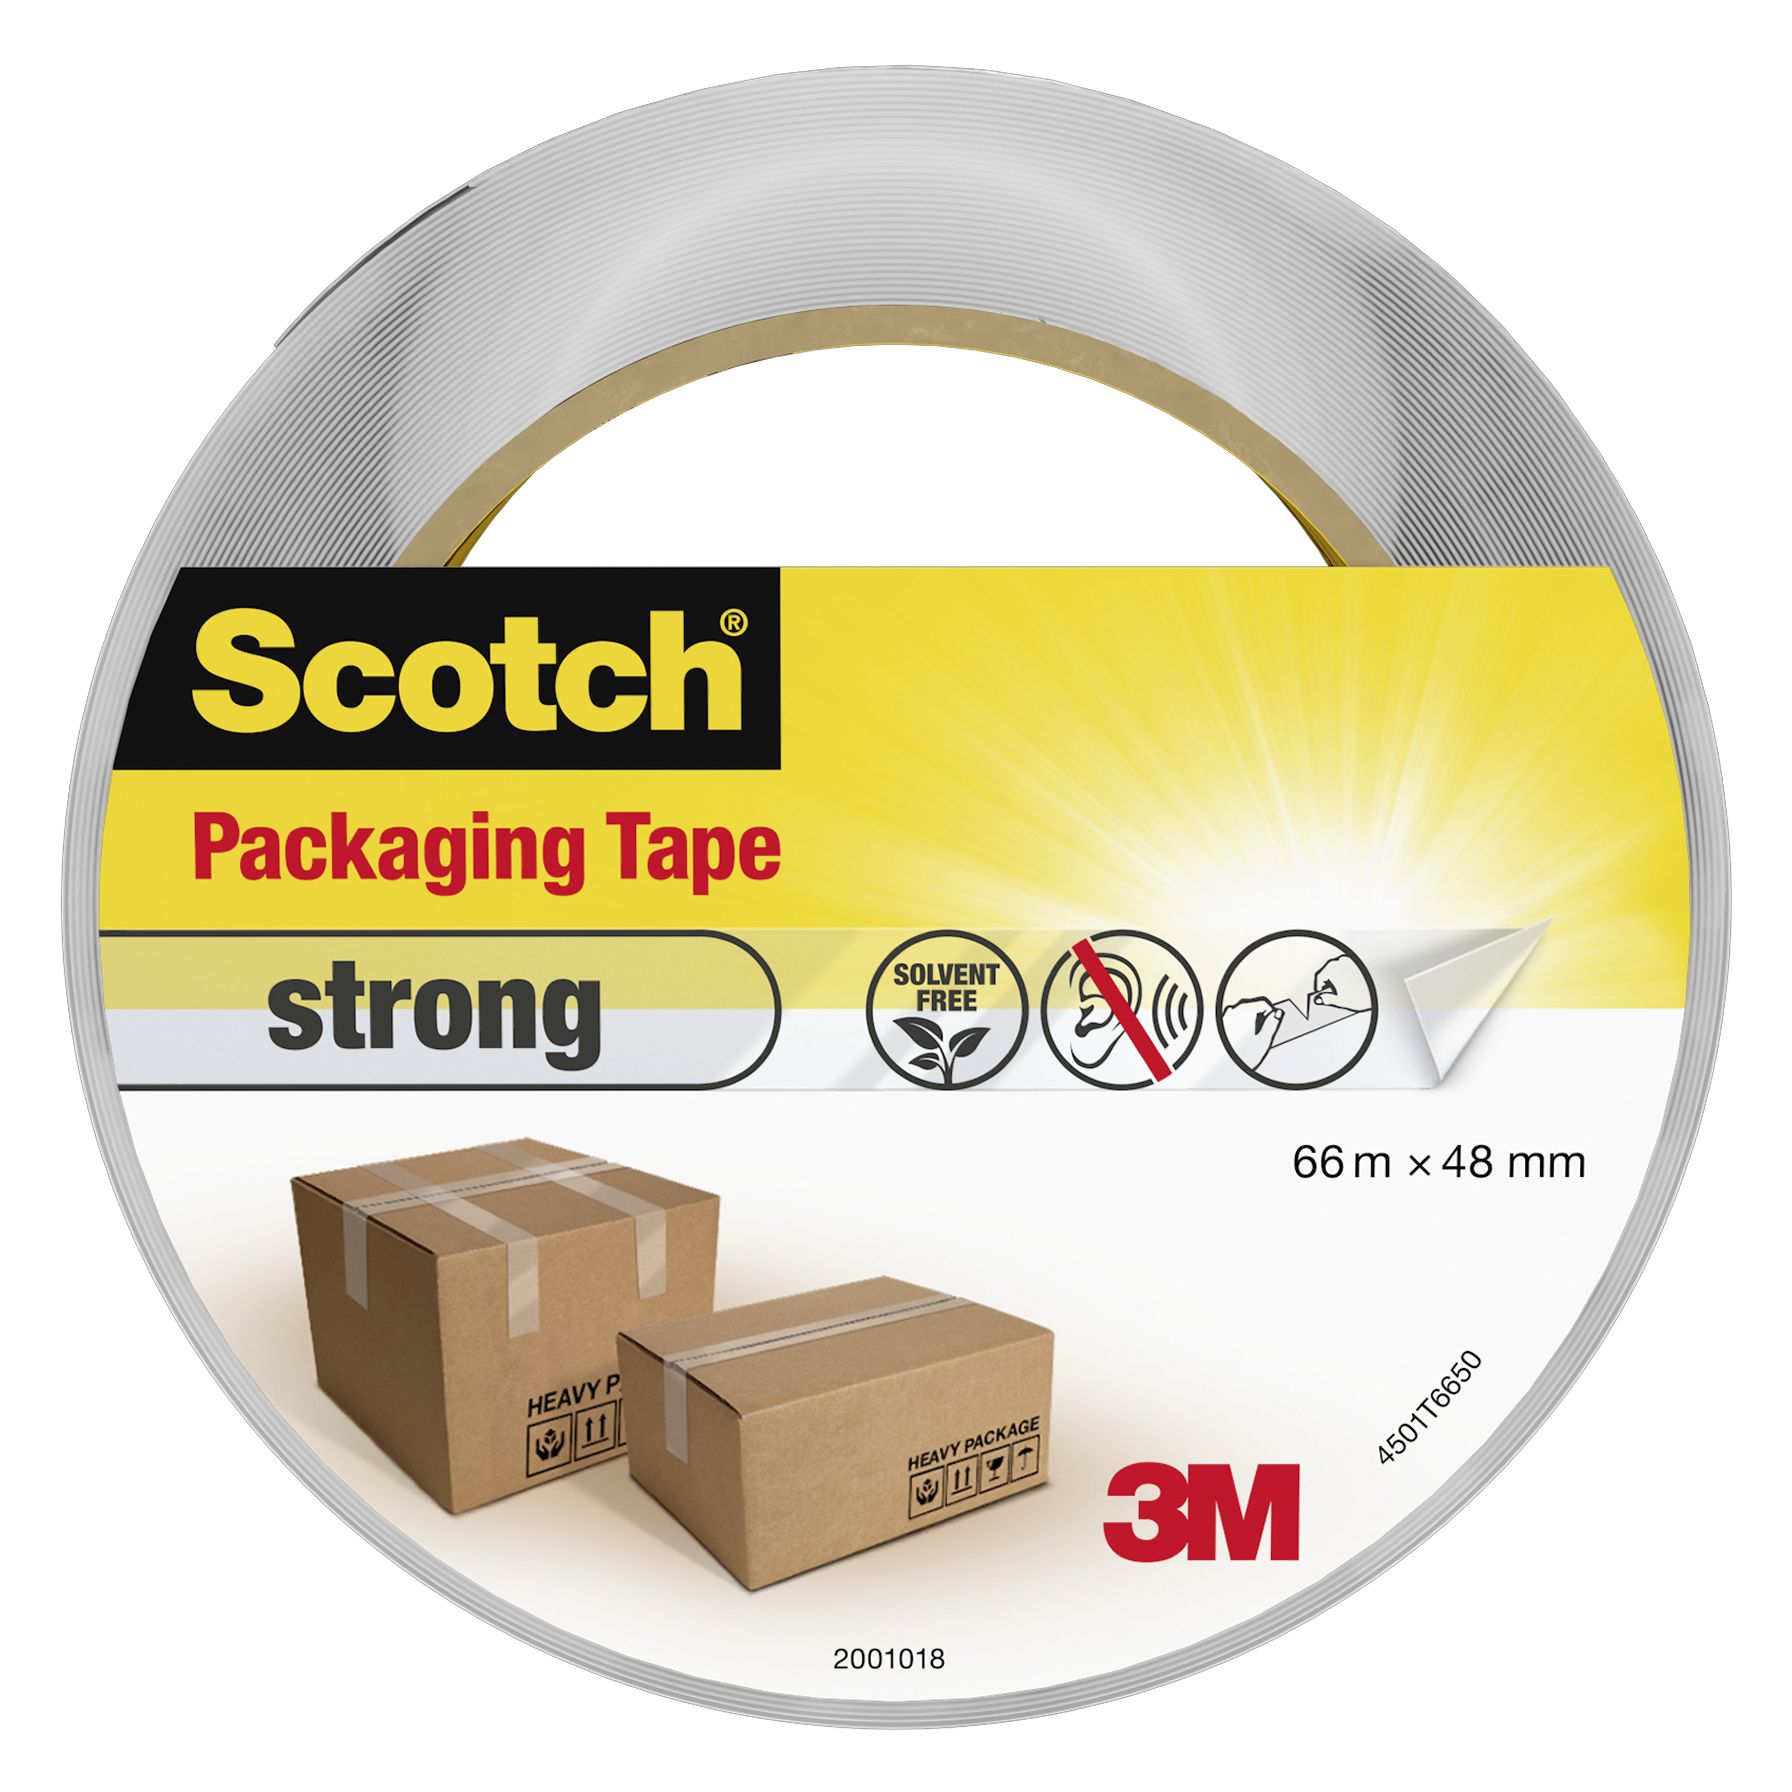 Скотч упаковка lux. Scotch Packaging Tape. Скотч laropack. Robust package. Cellophane package.